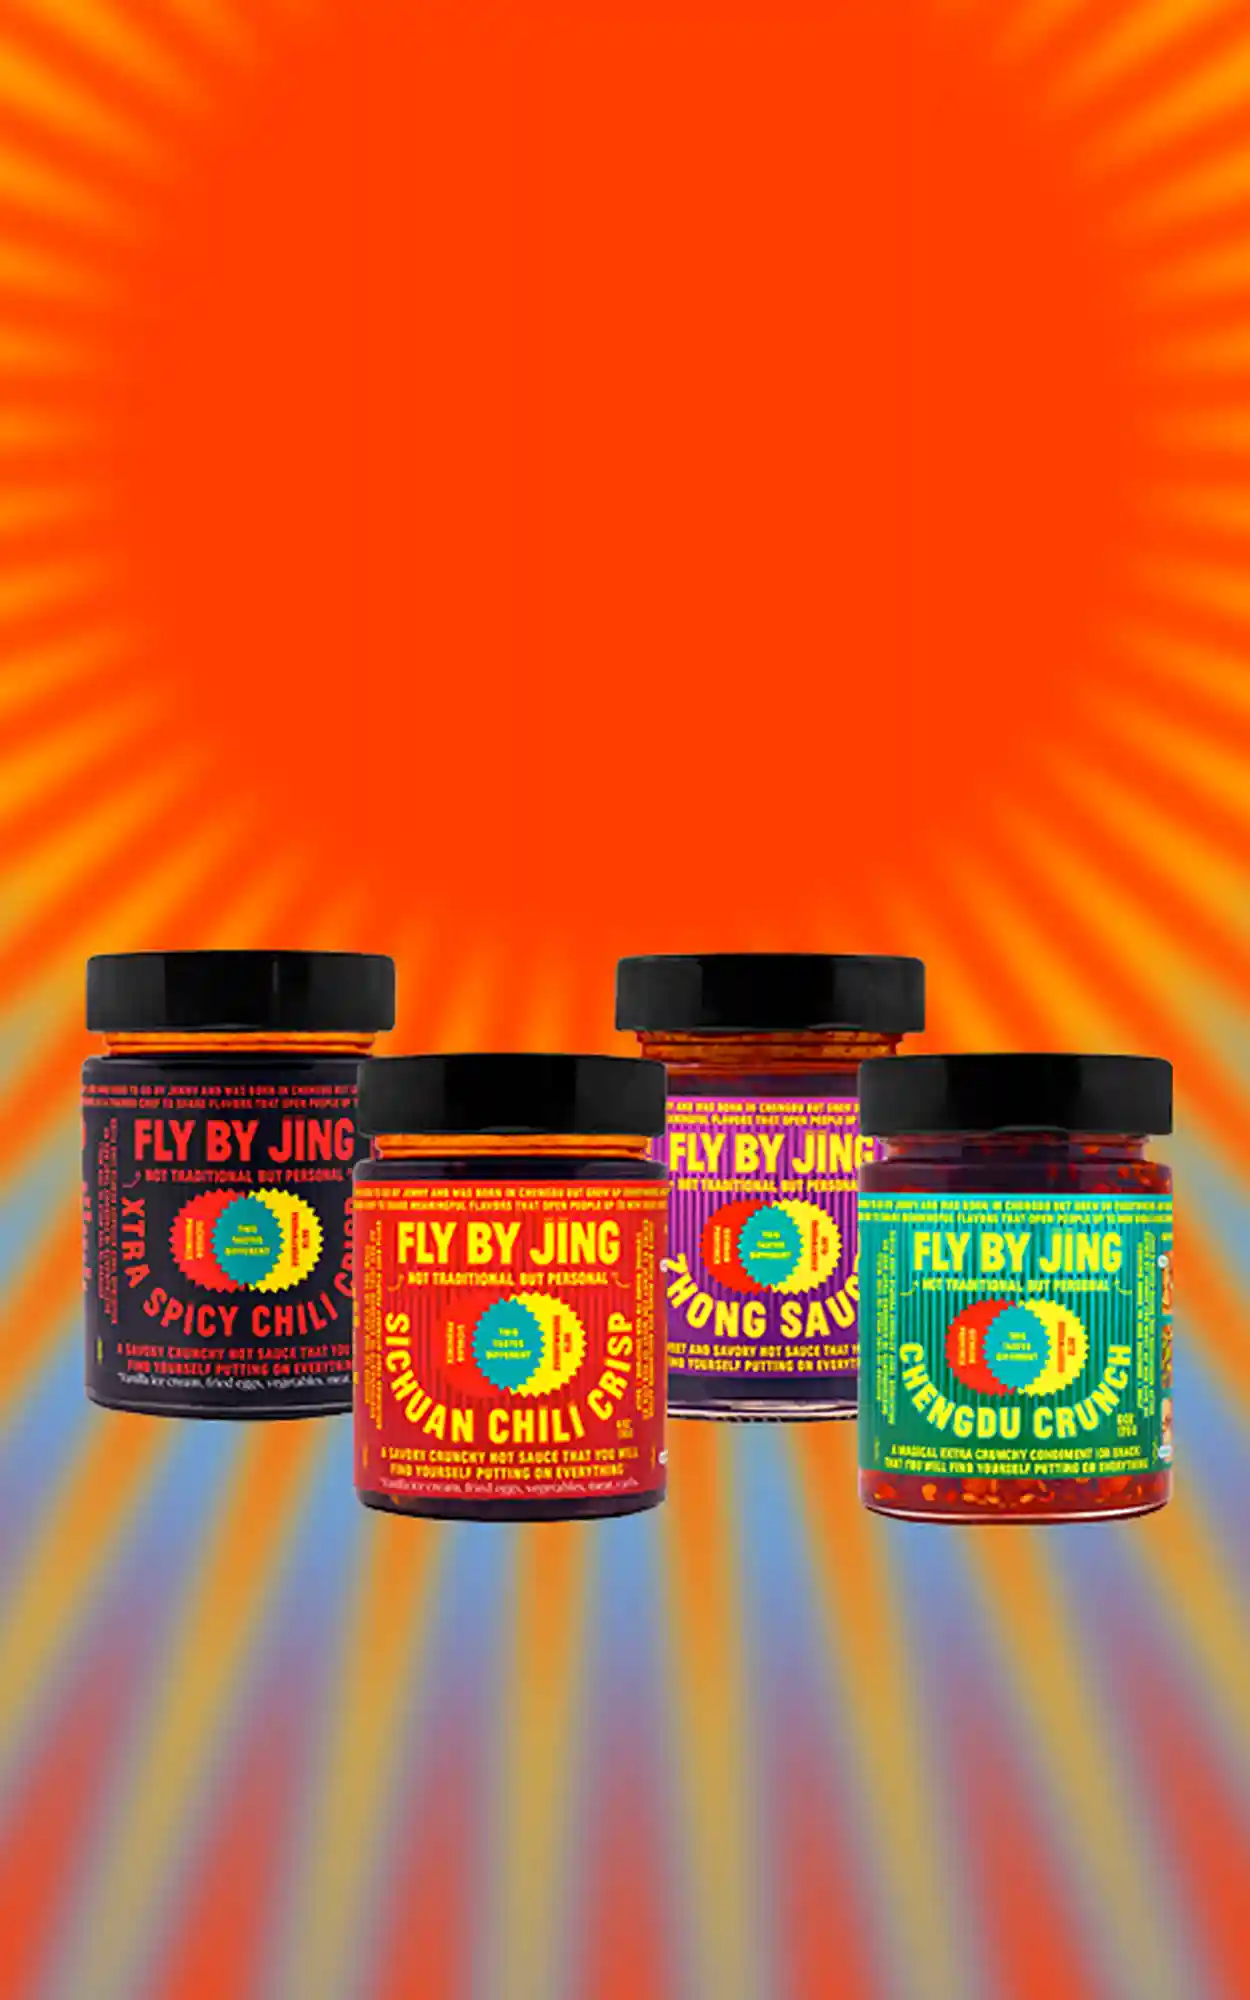 Fly By Jing sauce jars with tie dye effect in the background